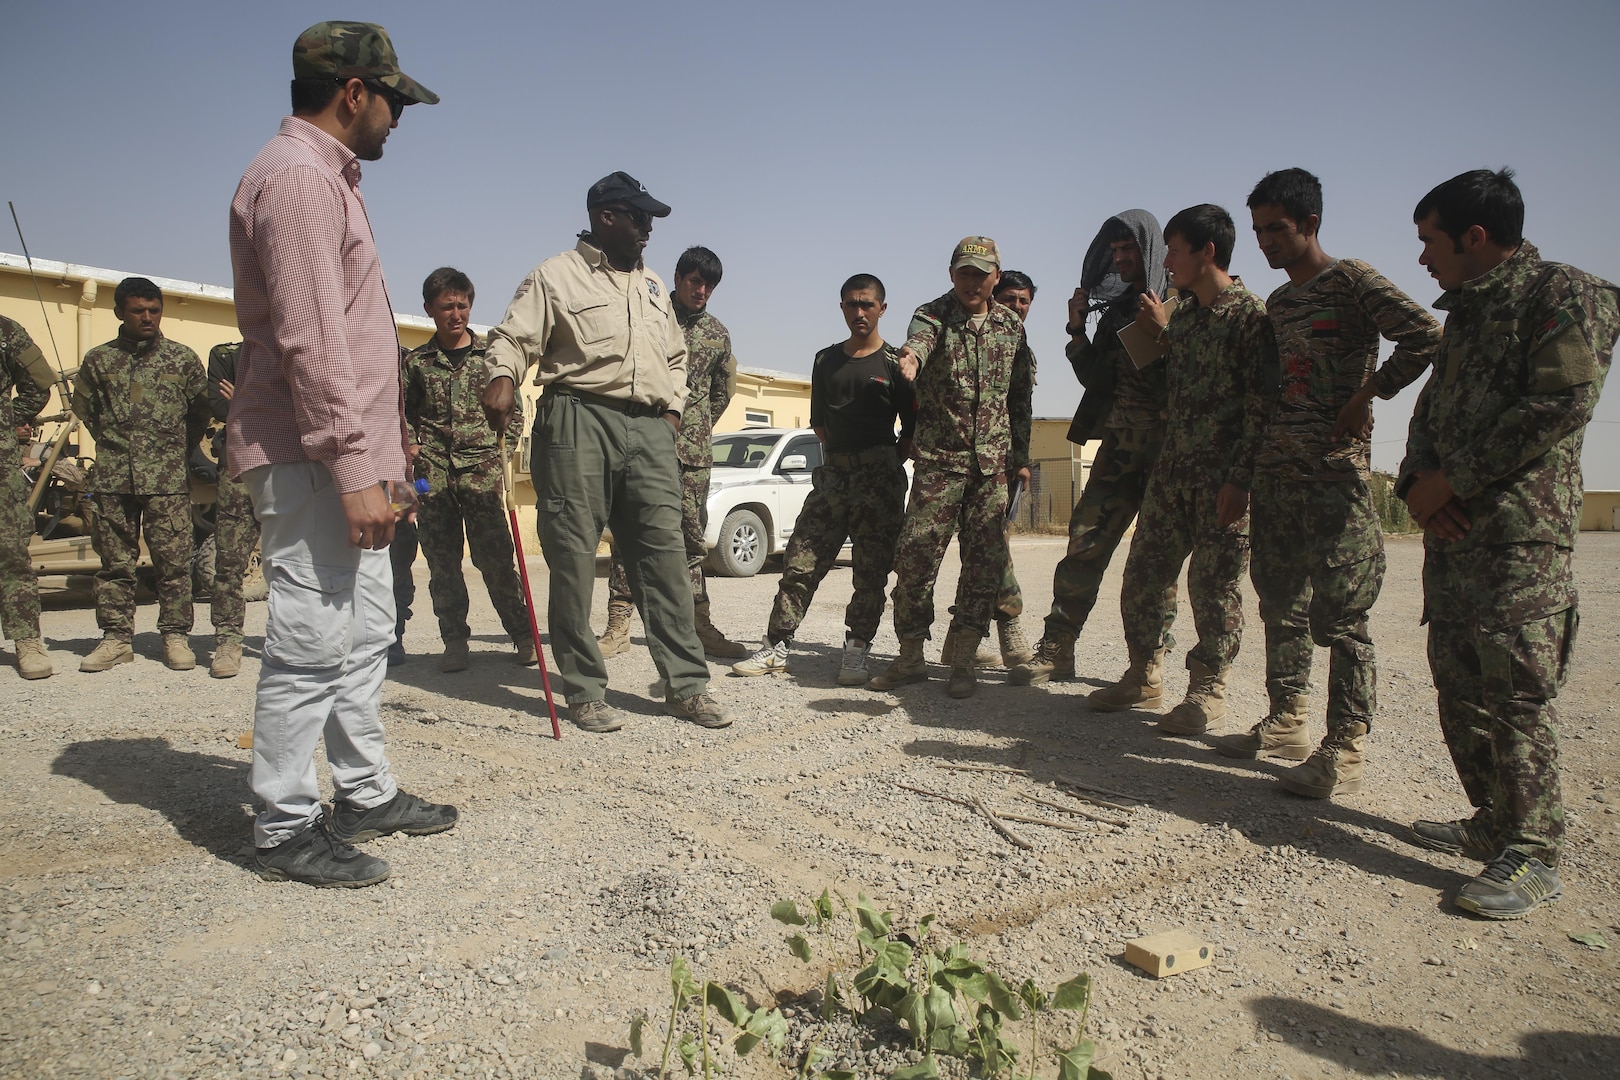 An Afghan National Army soldier with 215th Corps indicates a possible location for an improvised explosive device using a terrain model at Camp Shorabak, Afghanistan, July 13, 2017. Approximately 70 engineer soldiers with various units from the 215th Corps recently began a route clearance course, an eight-week training cycle designed to enhance their counter IED skills and help promote maneuverability throughout the region. (U.S. Marine Corps photo by Sgt. Lucas Hopkins)